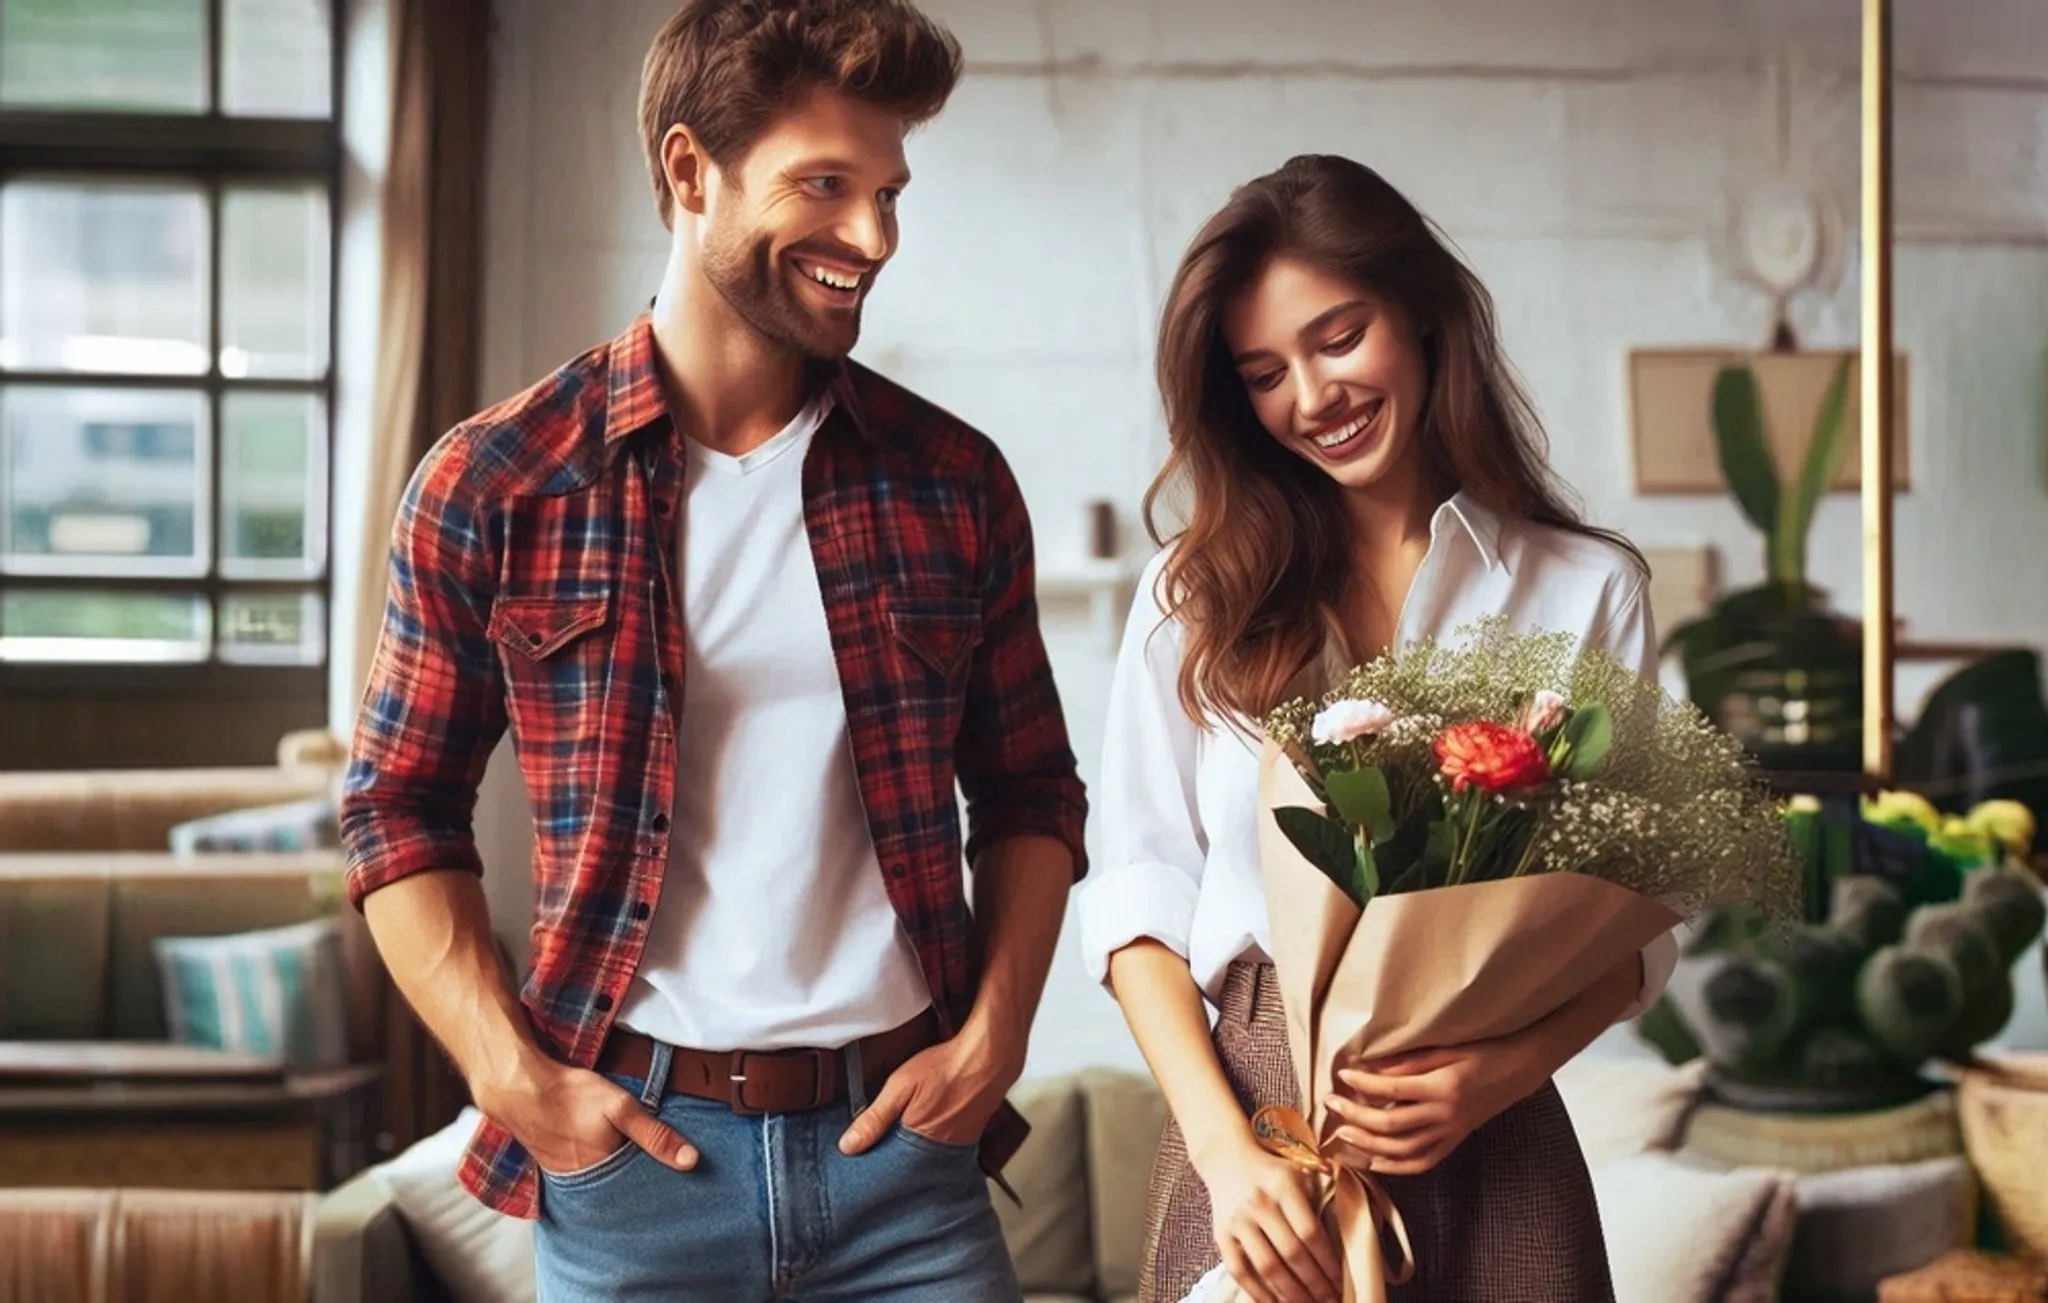 80+ Best Rizz Pick Up Lines to Help You Flirt Effortlessly